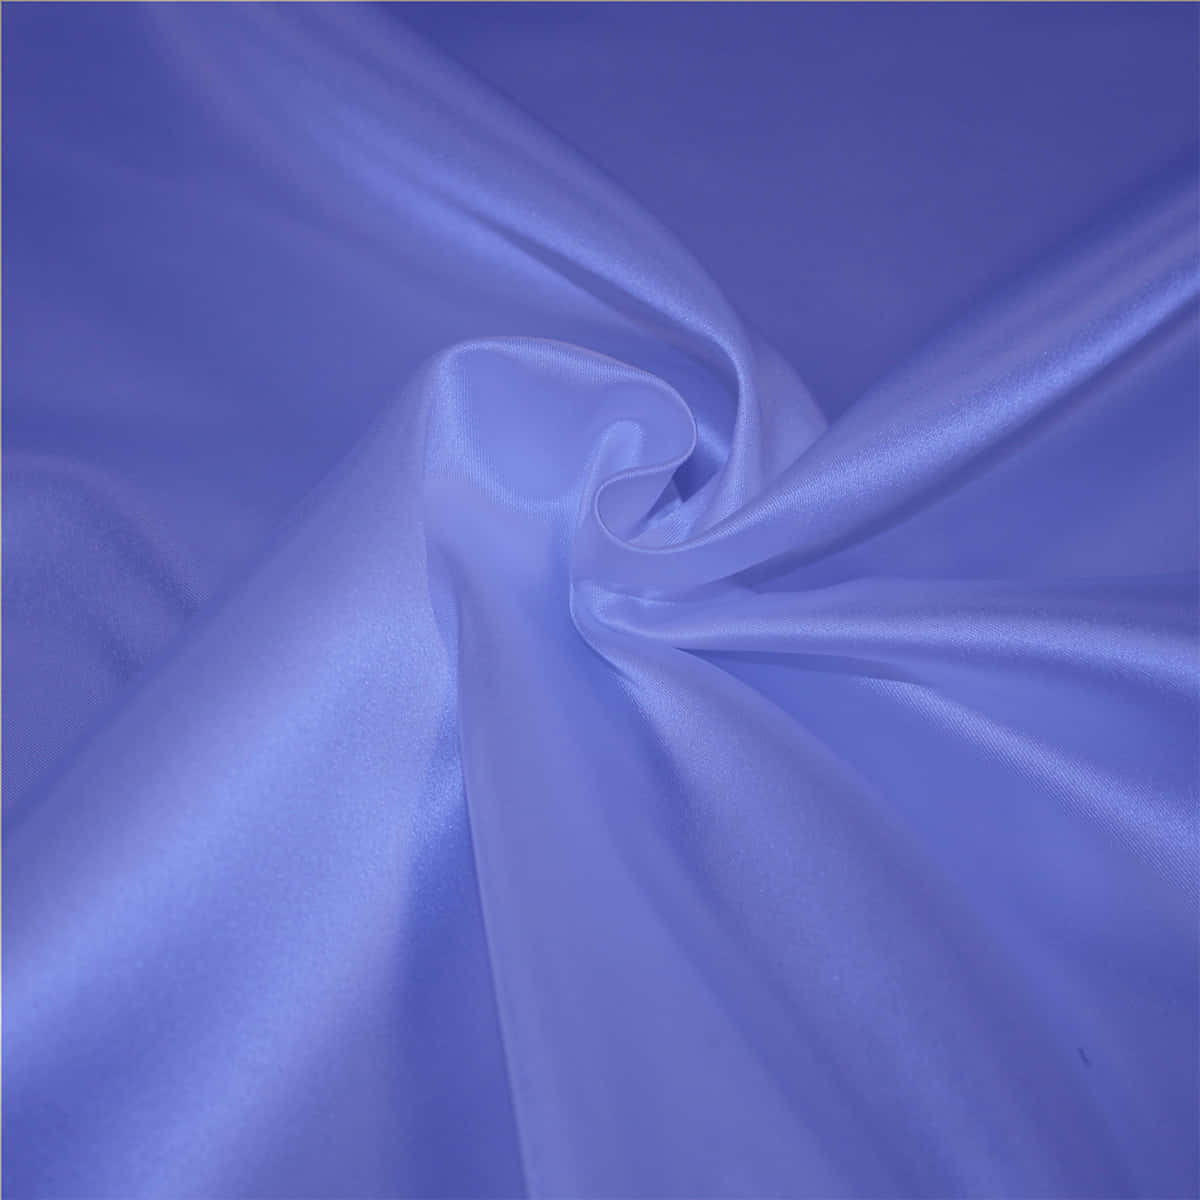 Come and bask in the warmth of Periwinkle Blue